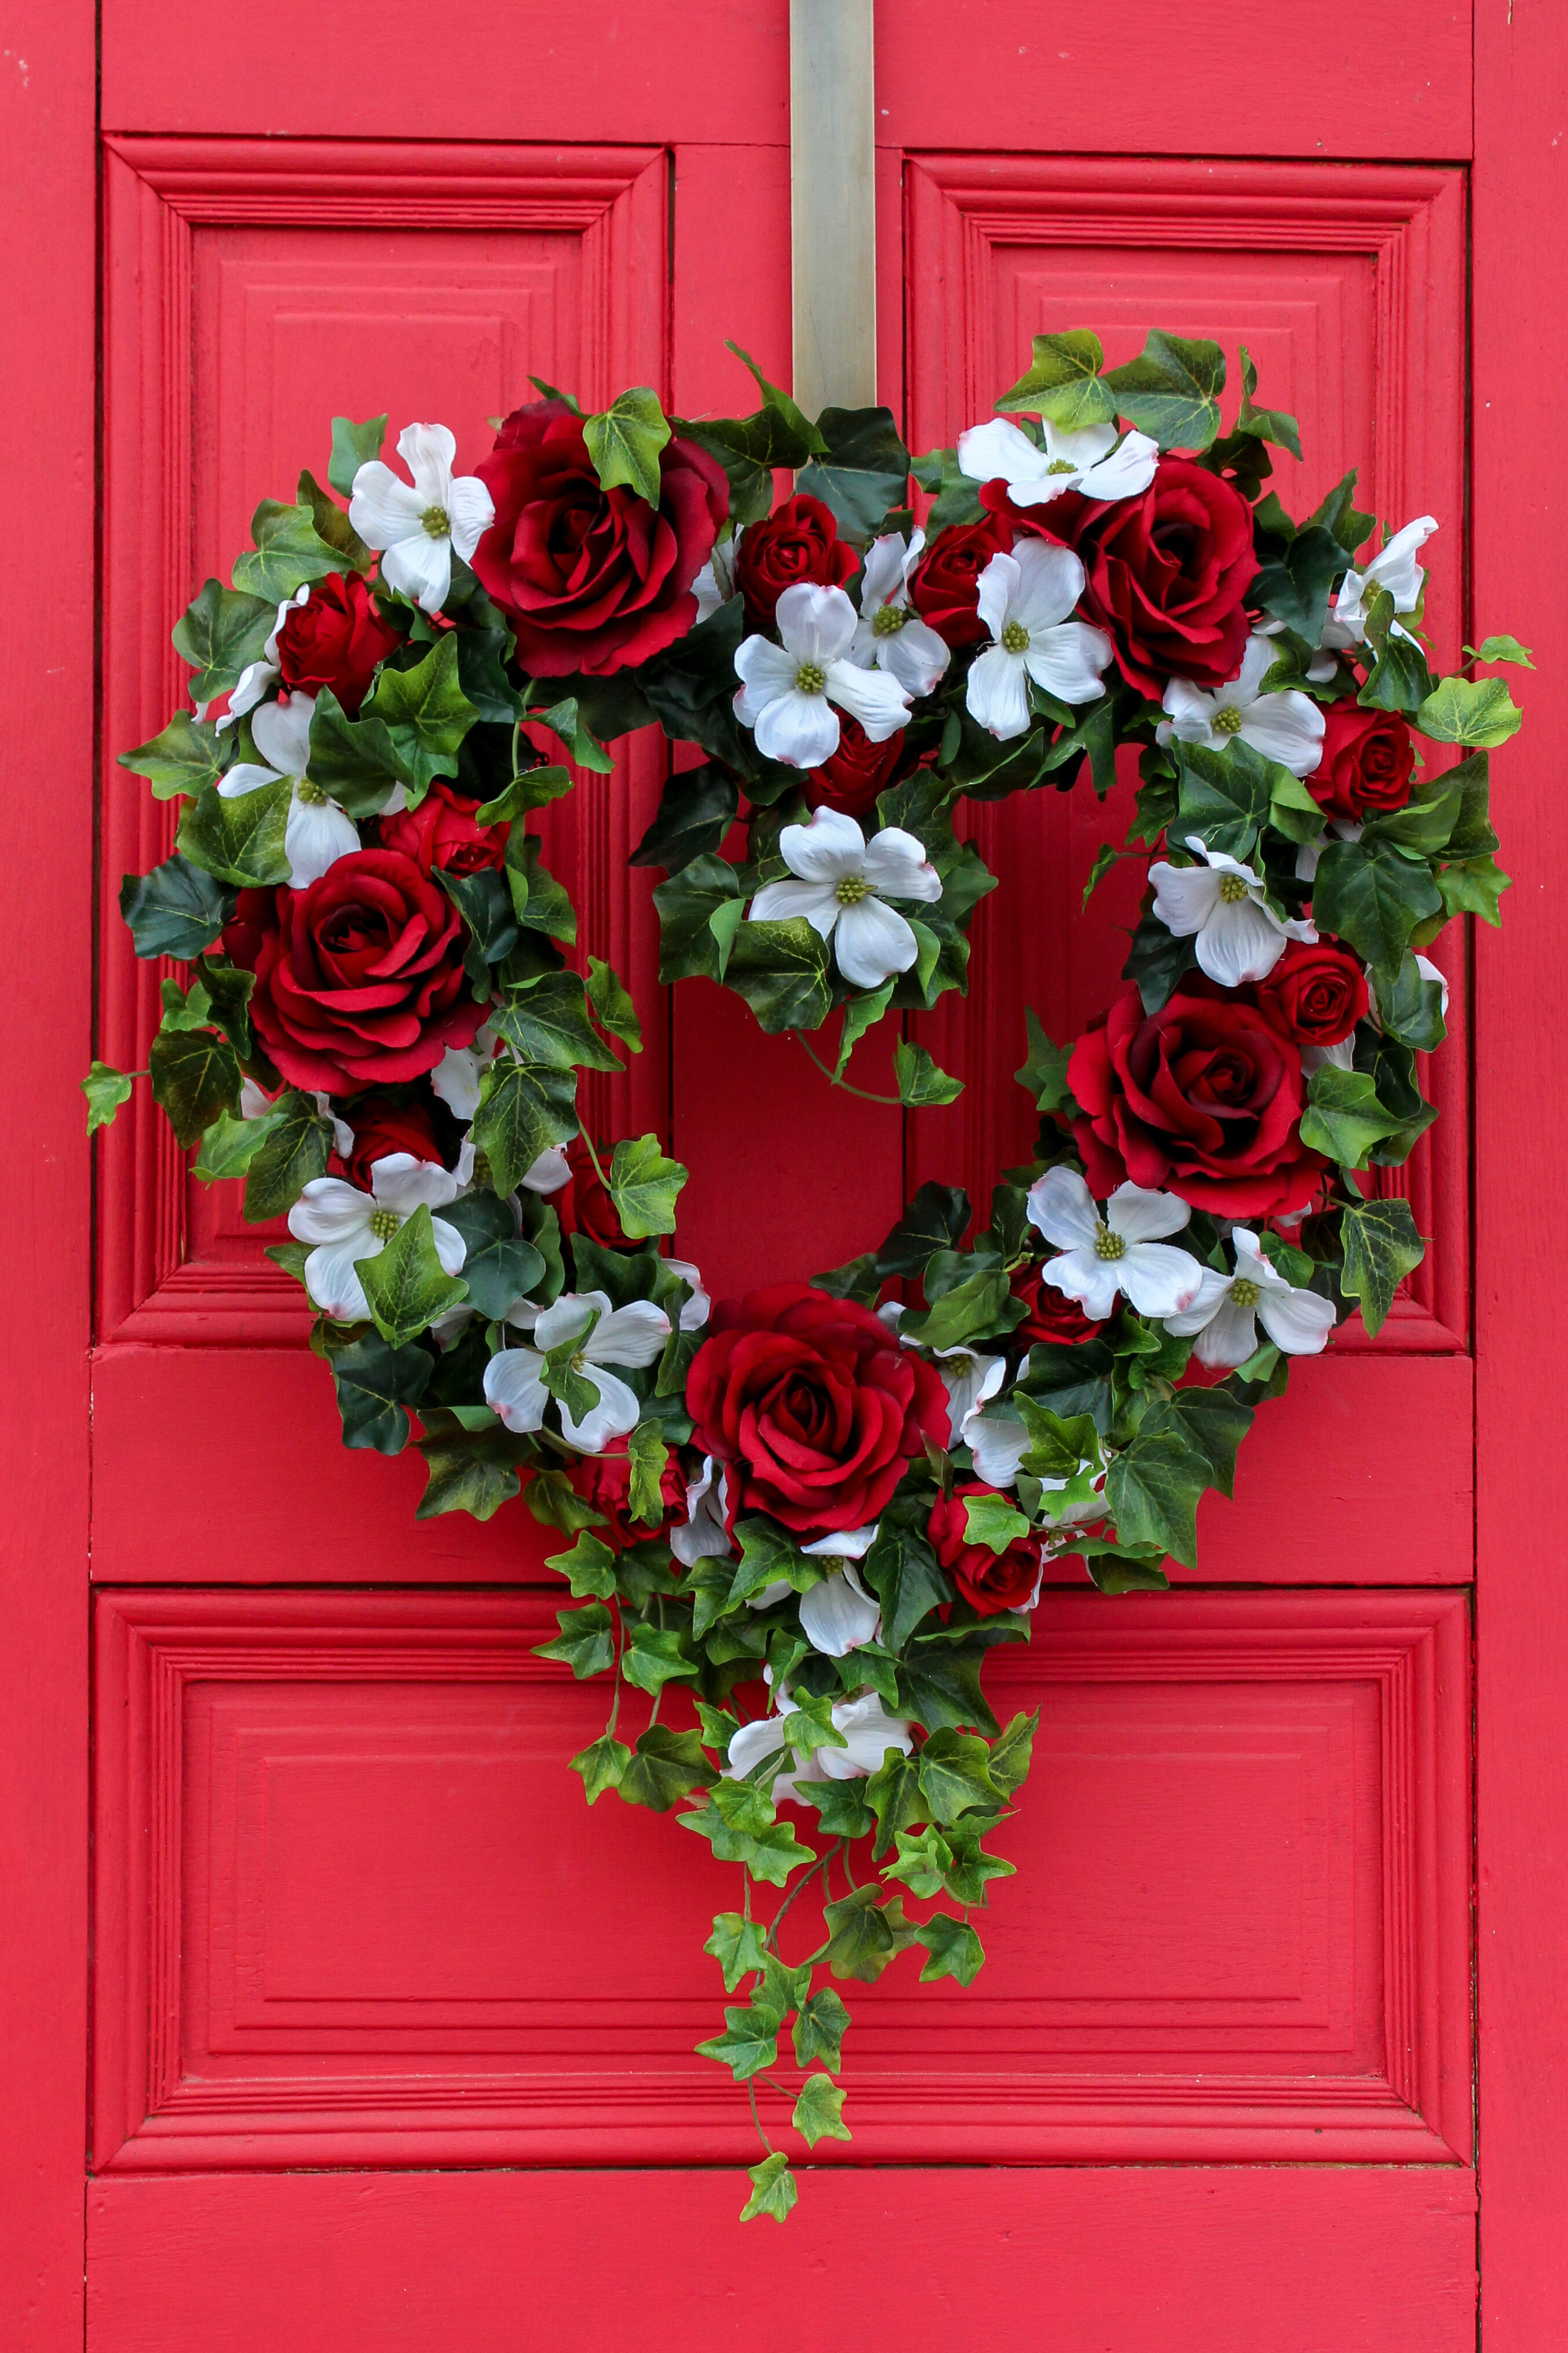 Valentines Wreaths for Front Door, Red and White Valentine Wreath With Red  Roses, Burlap Heart Wreath, Outdoor Valentines Wreath 